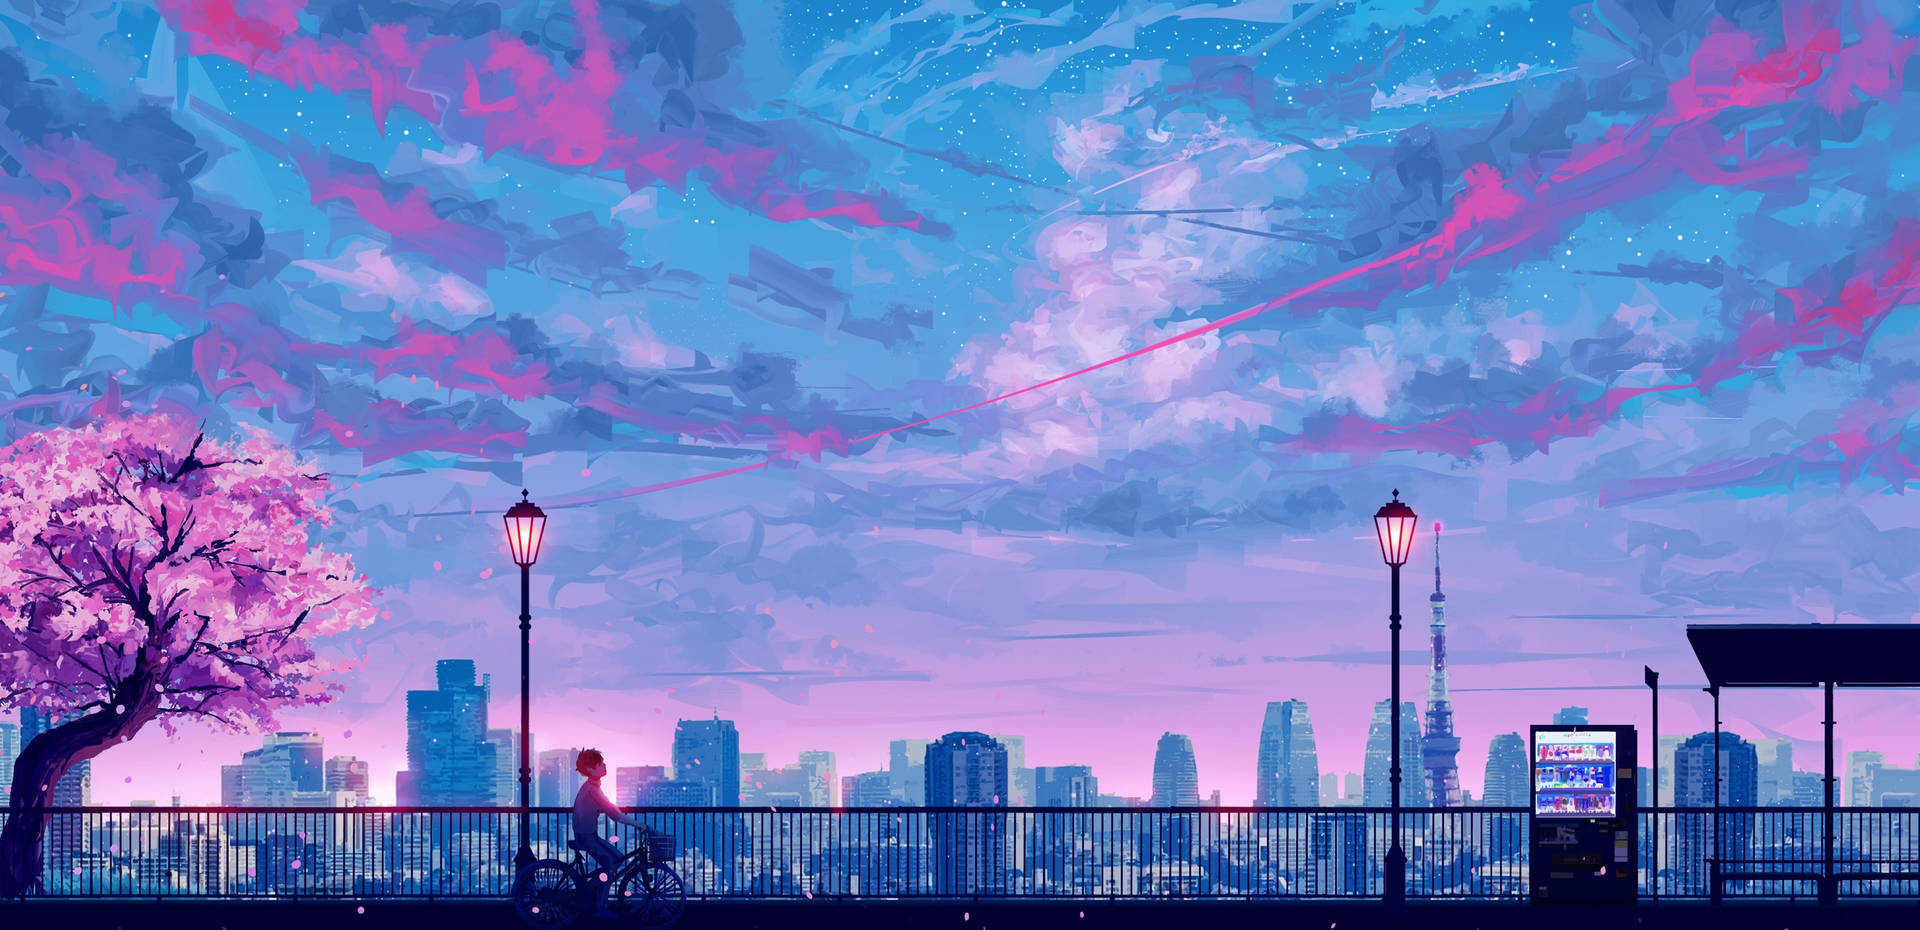 Colorful Sky 90s Anime Aesthetic Desktop Picture